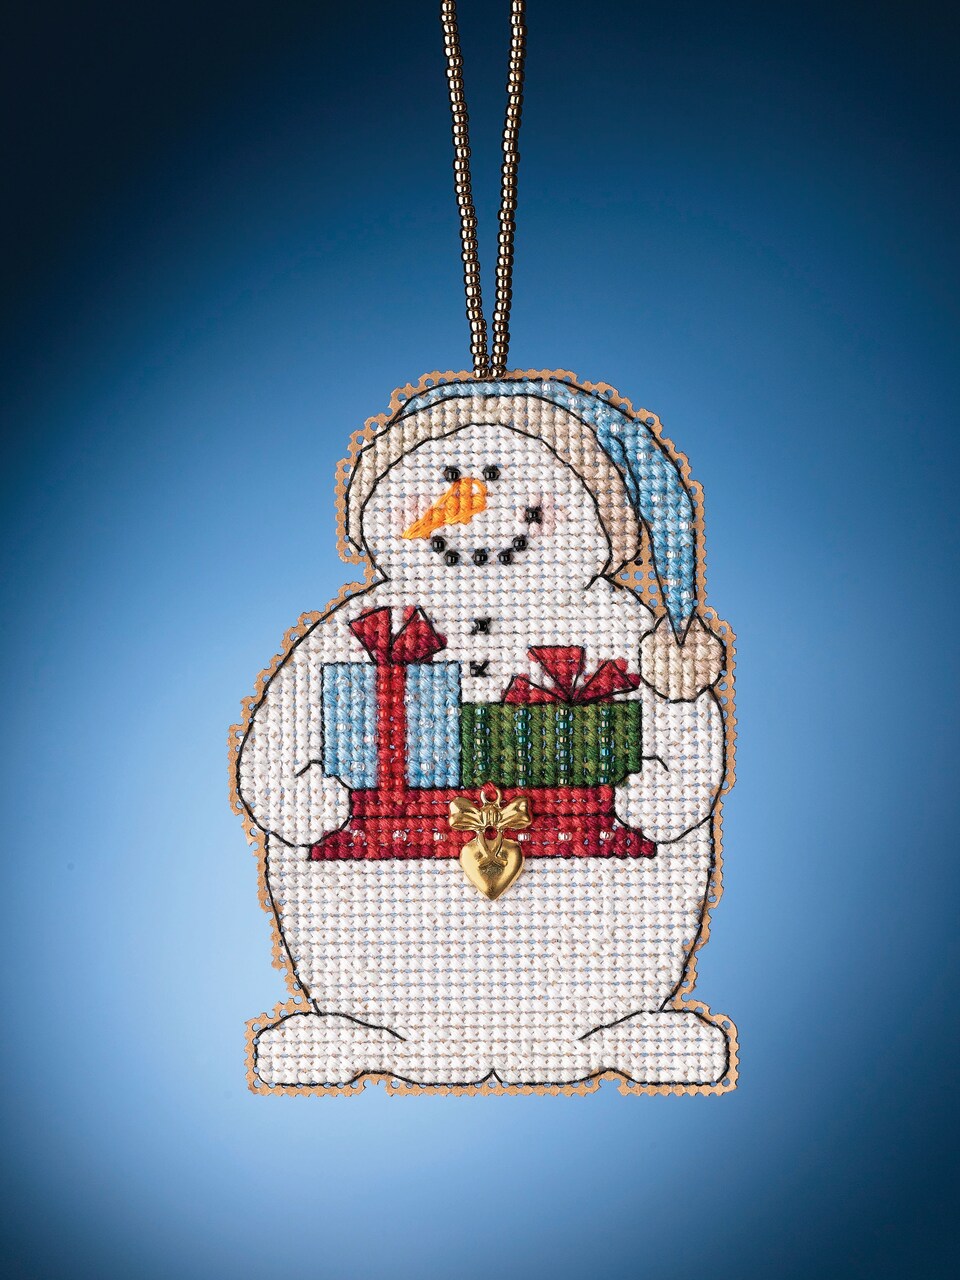 Mill Hill Counted Cross Stitch Ornament Kit 2.5X3.5-Giving Snowman (14  Count)